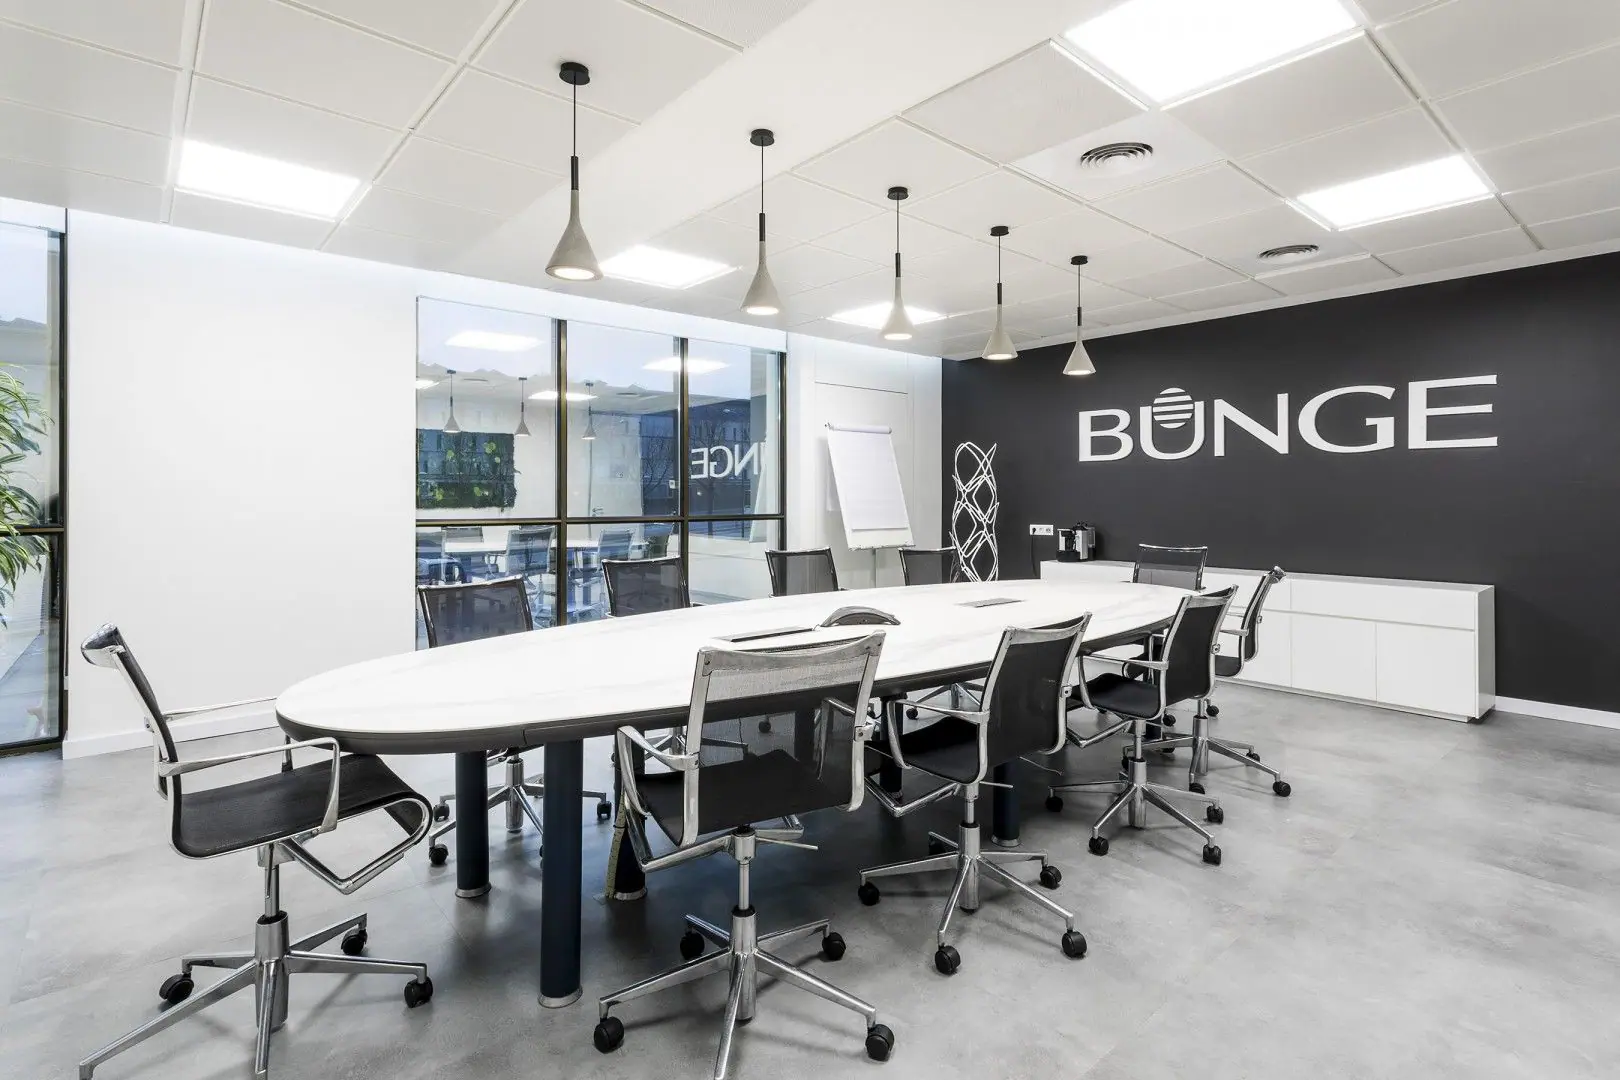 55202-55200-bunge-offices